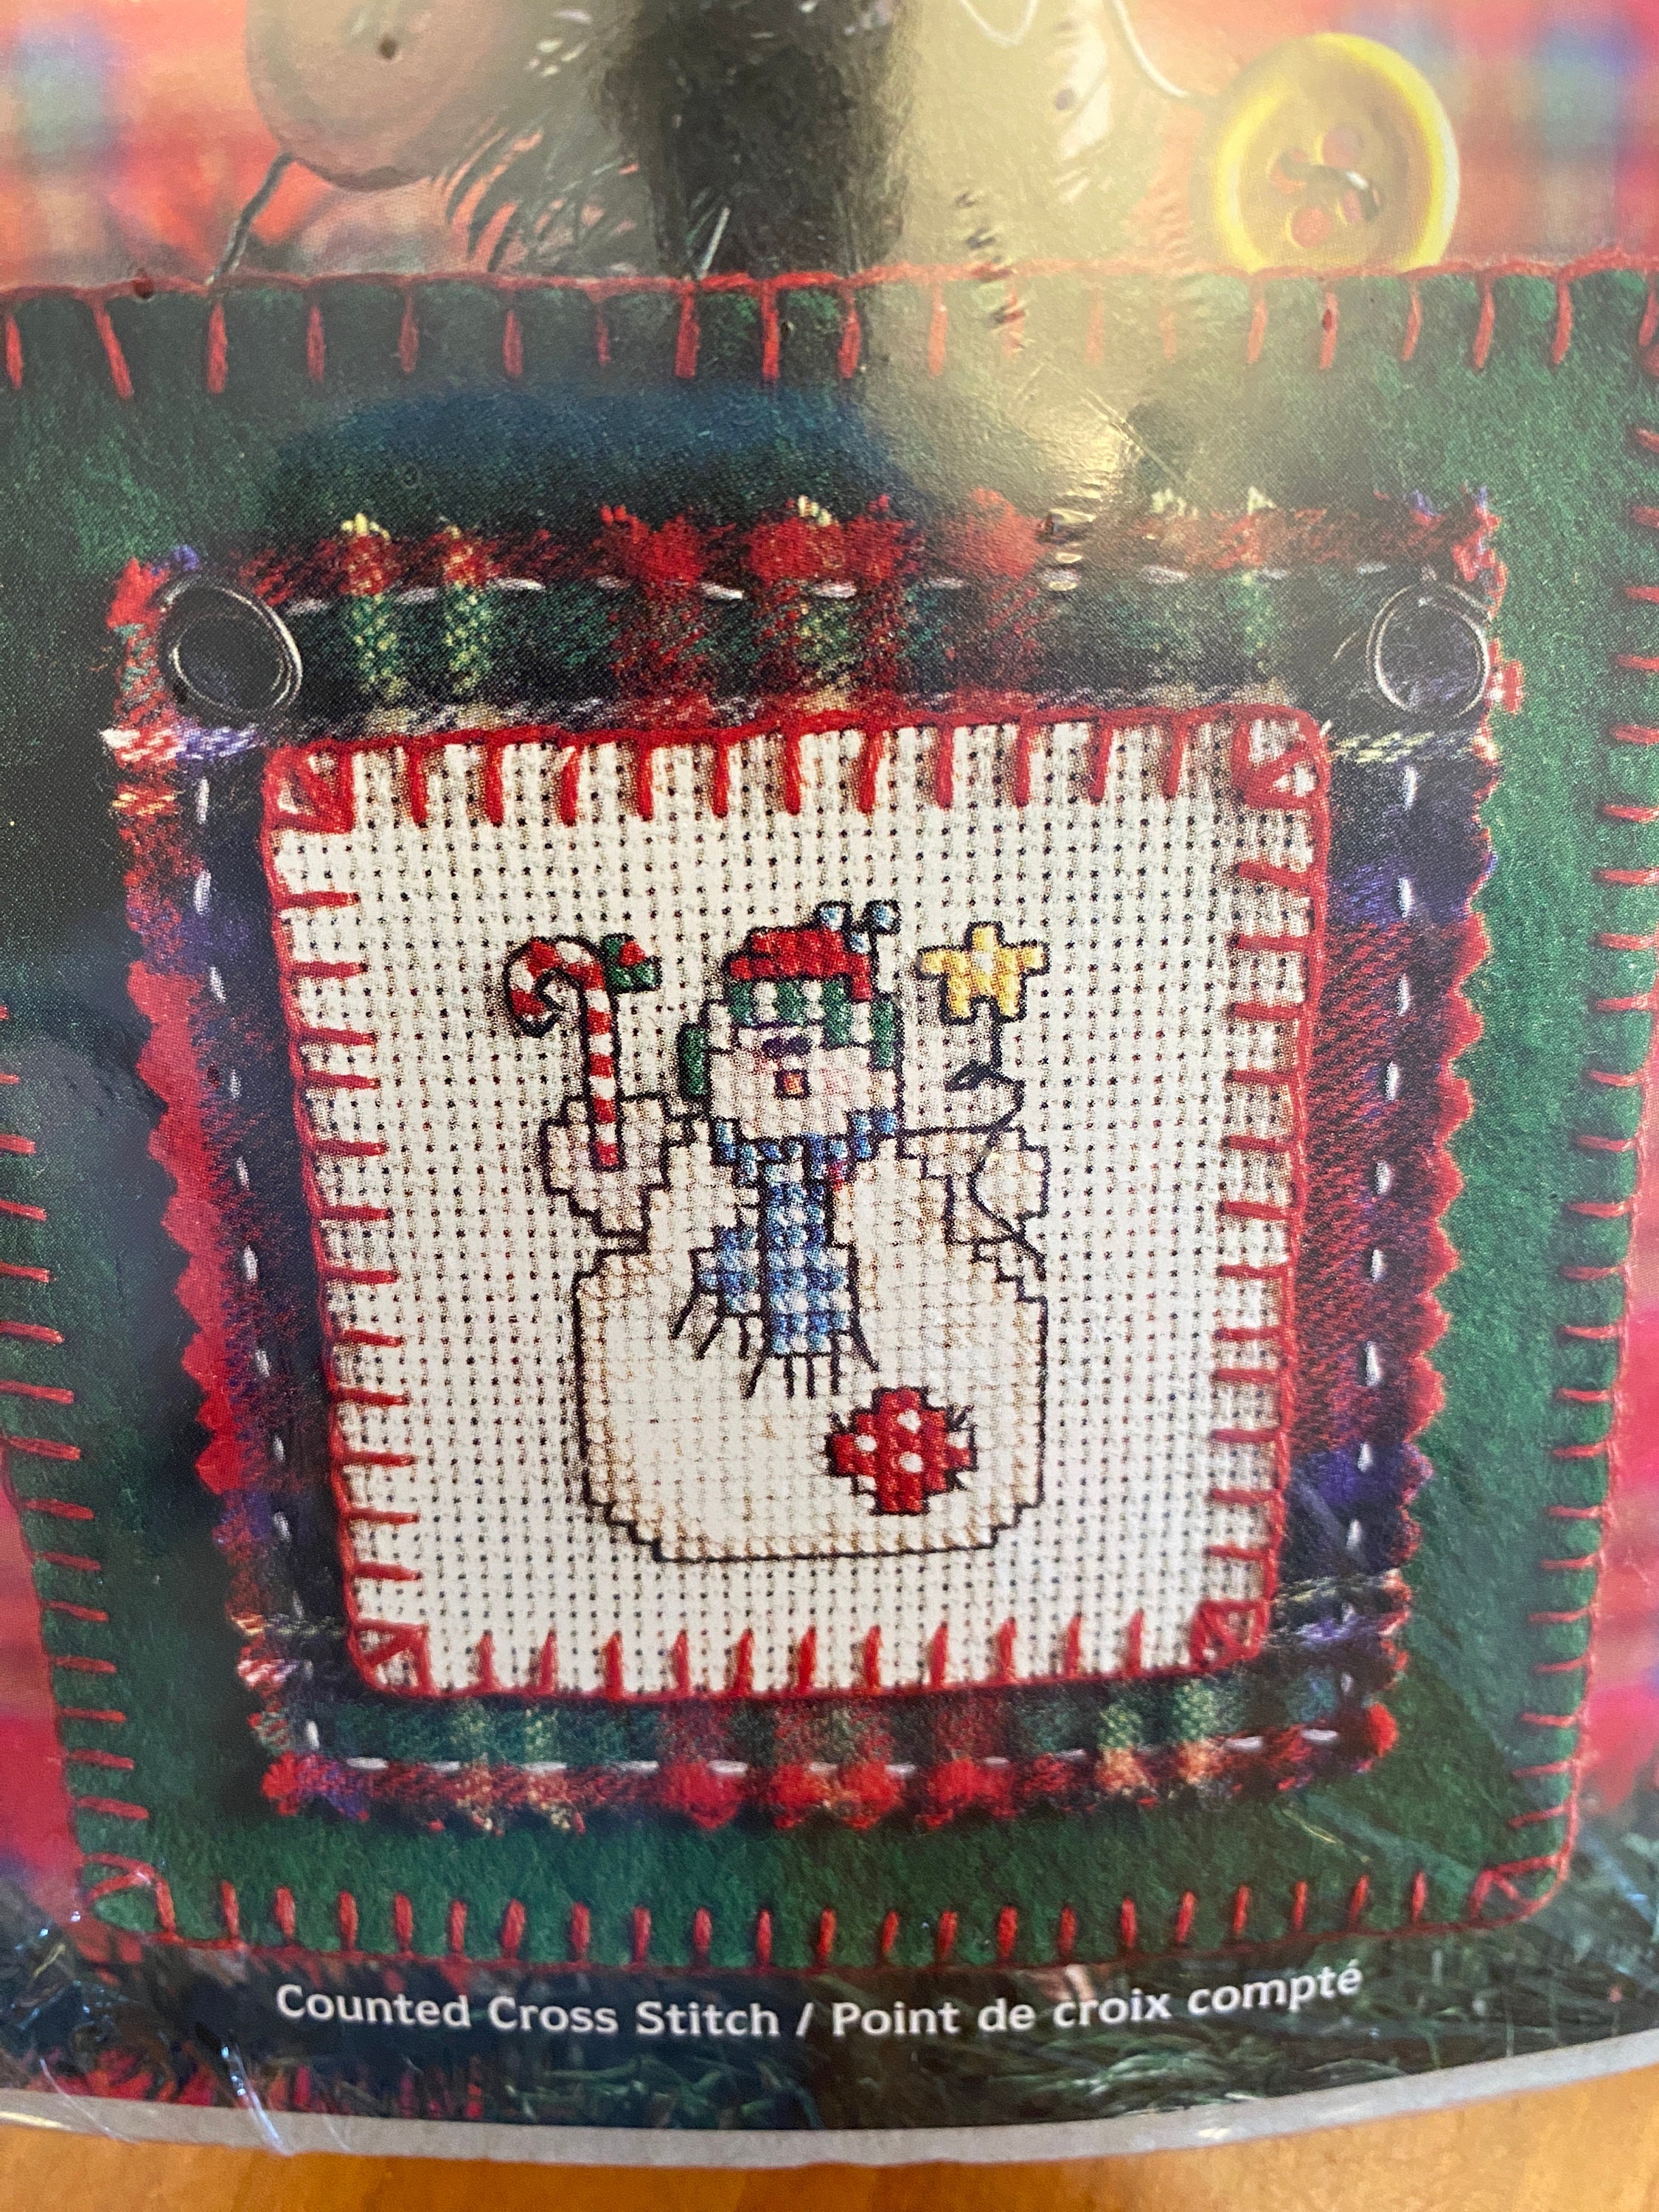 Cross Stitch Pattern Book 50 QUICKIES For CHRISTMAS ~ Ornaments